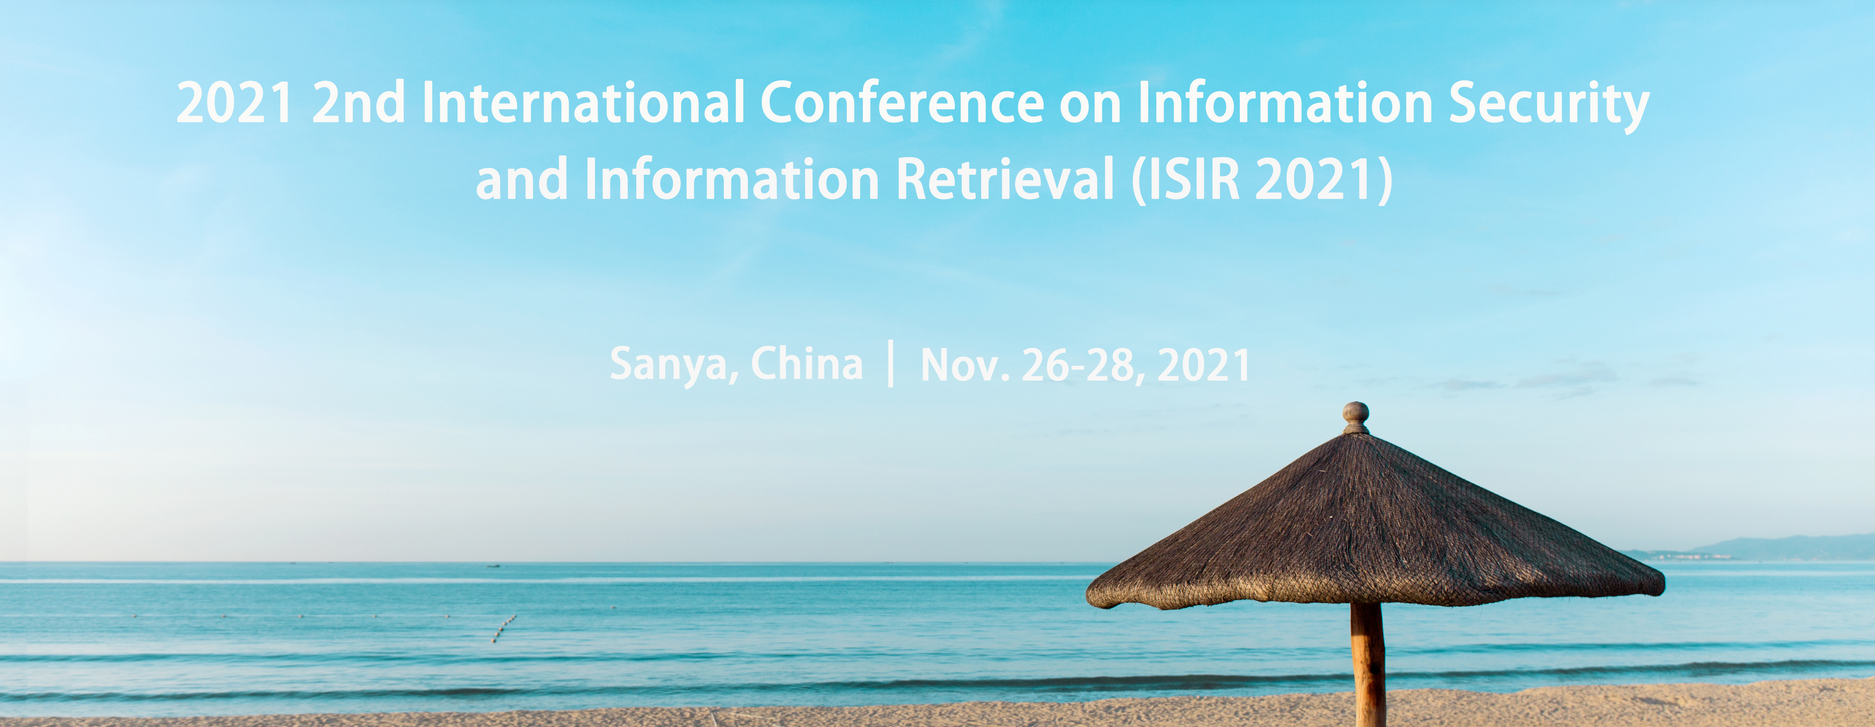 2021 2nd International Conference on Information Security and Information Retrieval (ISIR 2021), Sanya, Hainan, China